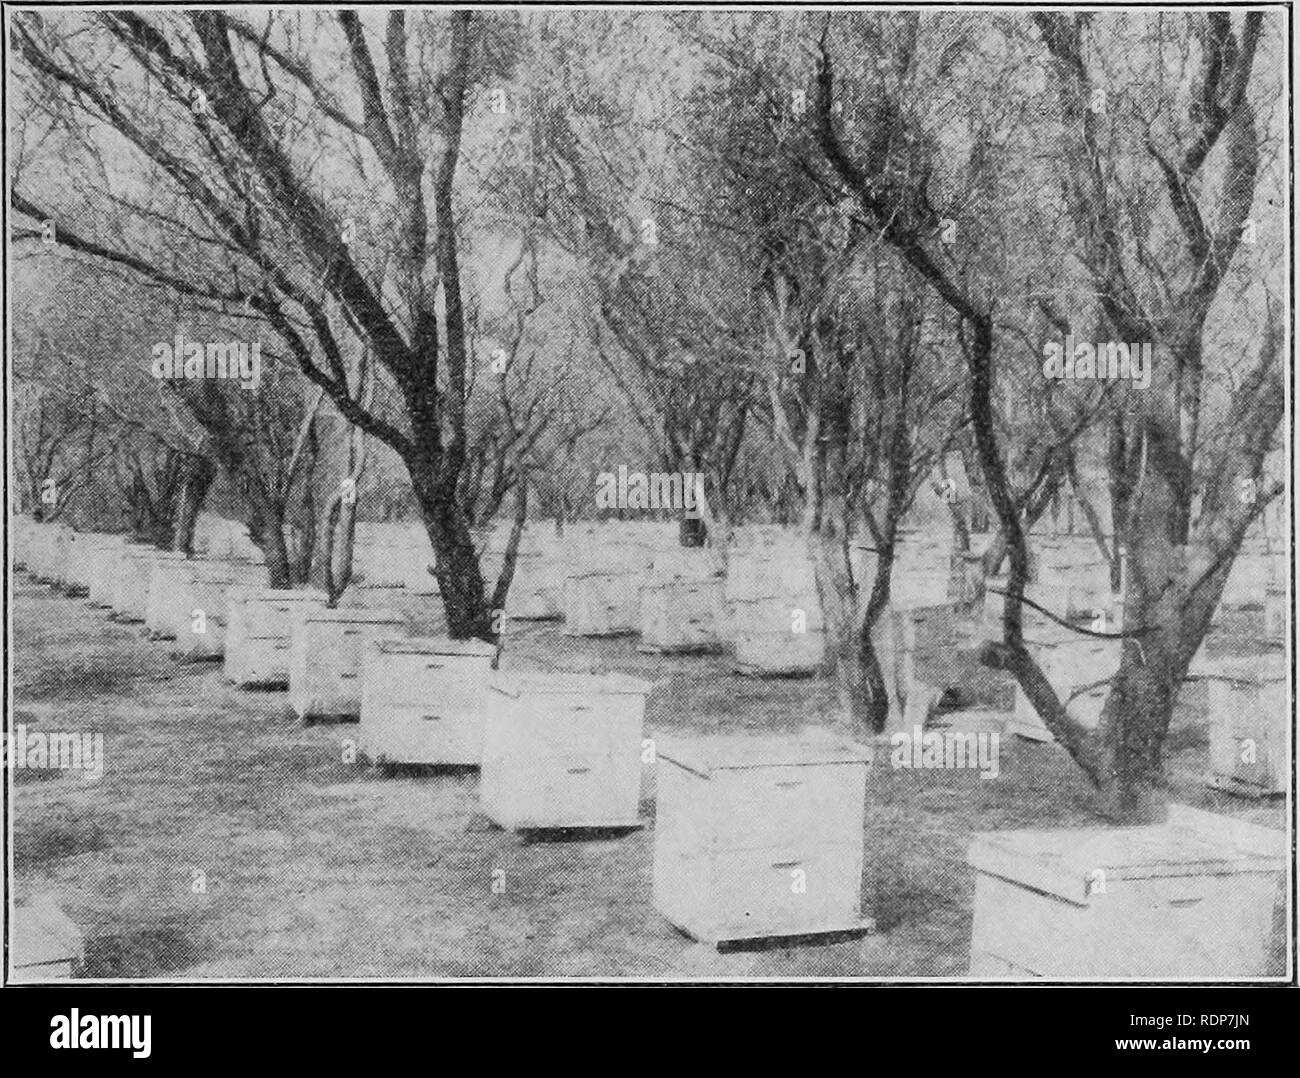 . Bee keeping. April 1919. To the disabled soldiers, sailors, and marines. To aid them in choosing a vocation. Bees. 15 The sage region of southern California offers great opportunities to the beekeeper. The honeys are chiefly white and secretion is abun- dant when there is sufficient rainfall. In this region also honey is obtained from blossoms of citrus fruits, which being irrigated are not so liable to failure as the plants growing in the desert. The chief problem in this part of the country is to strengthen the colonies in time for the nectar flow from citrus fruit blossoms. This may be do Stock Photo